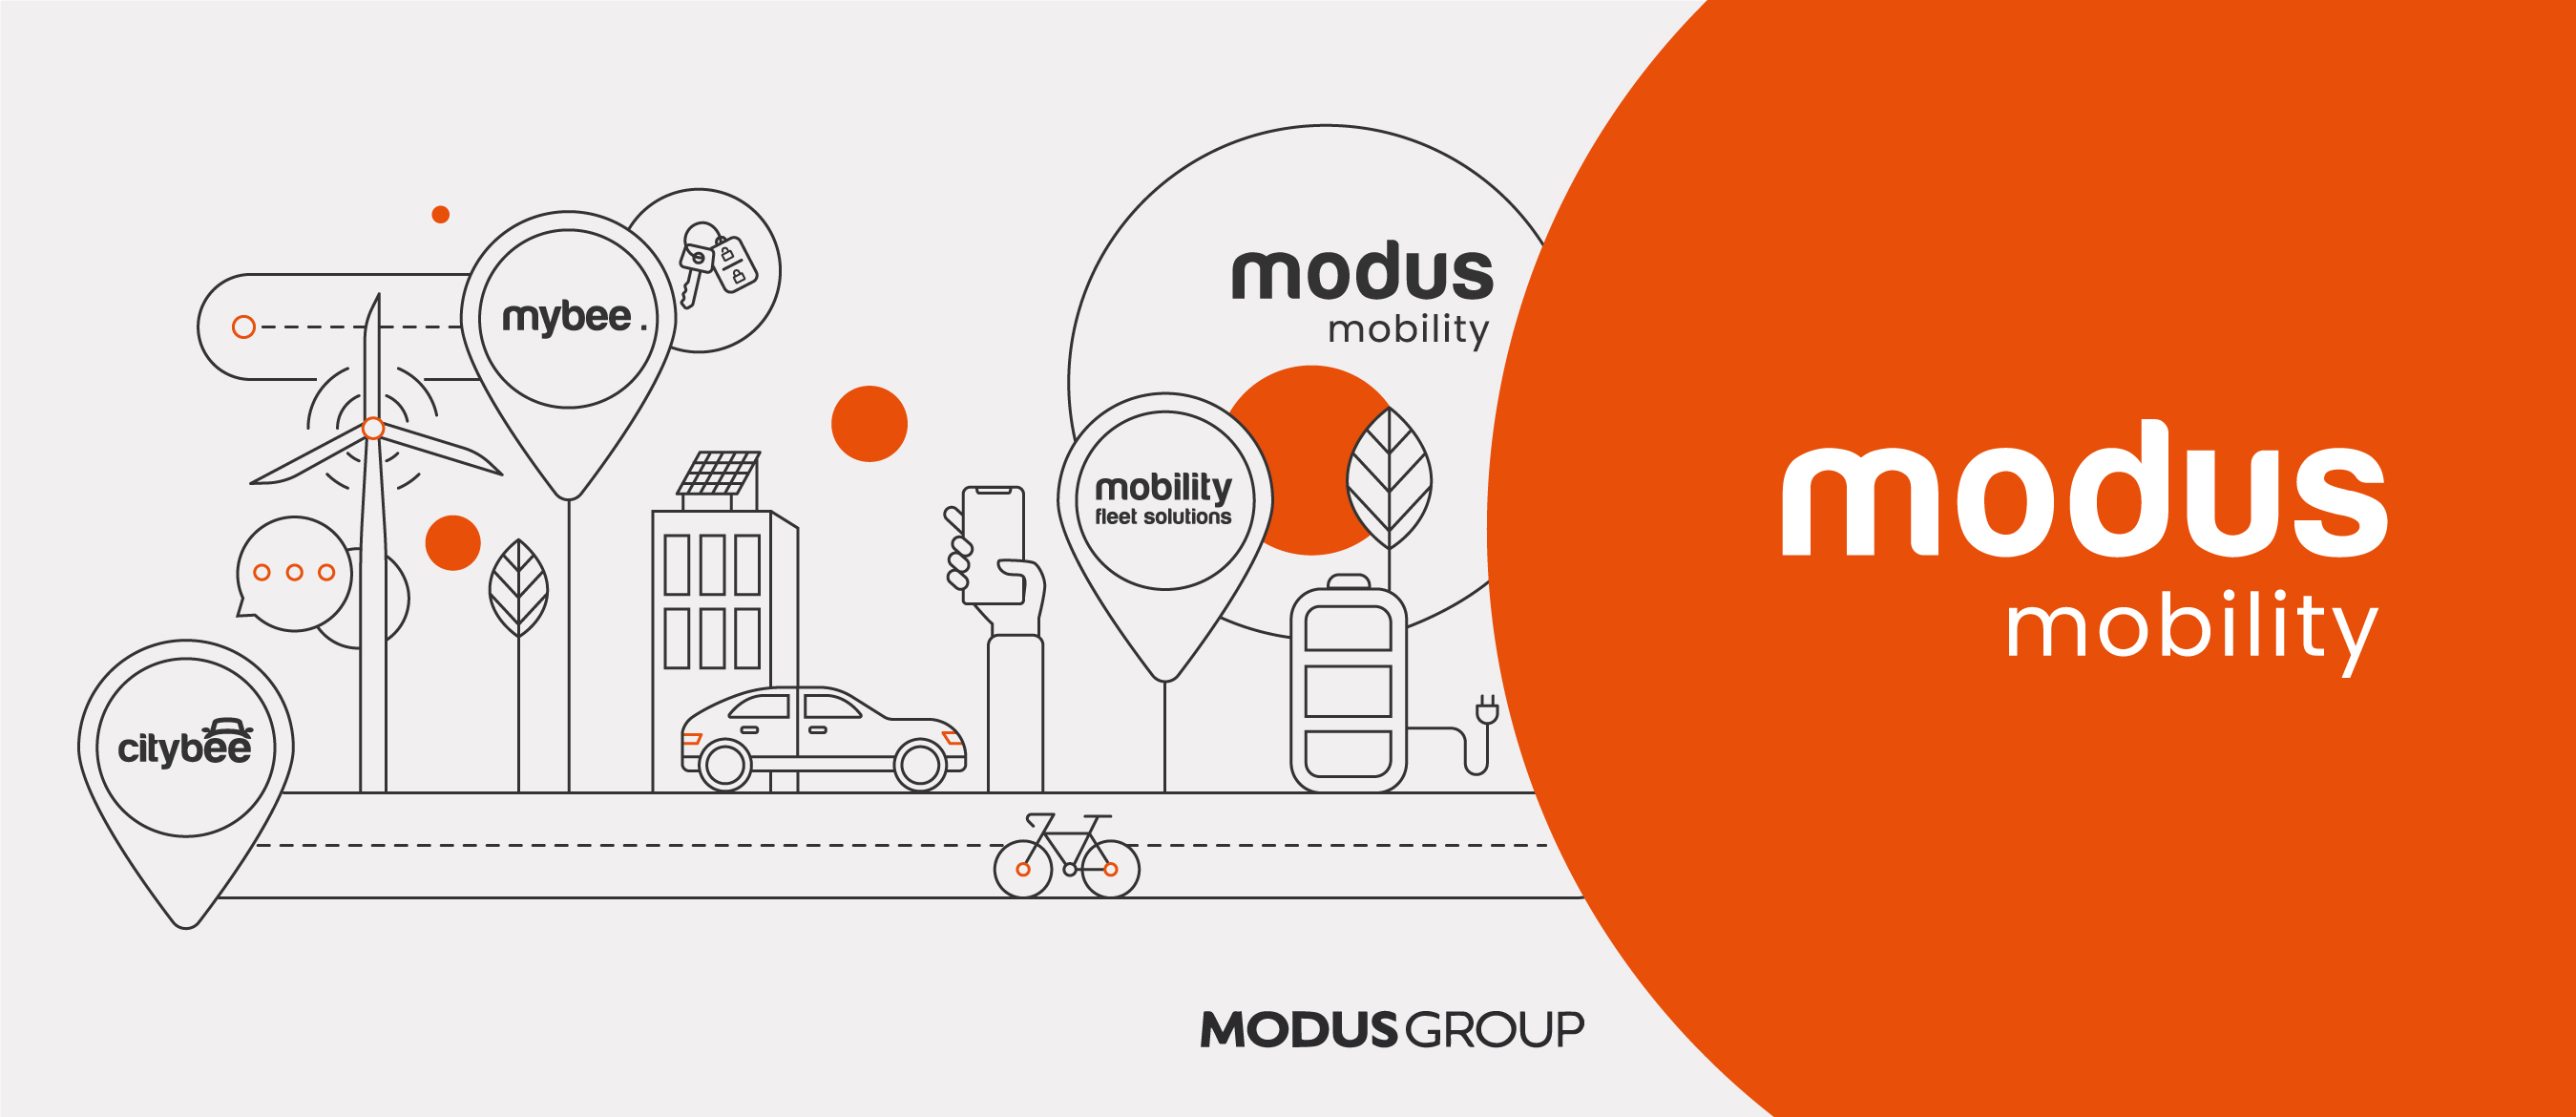 Modus Mobility Pricing Specialist